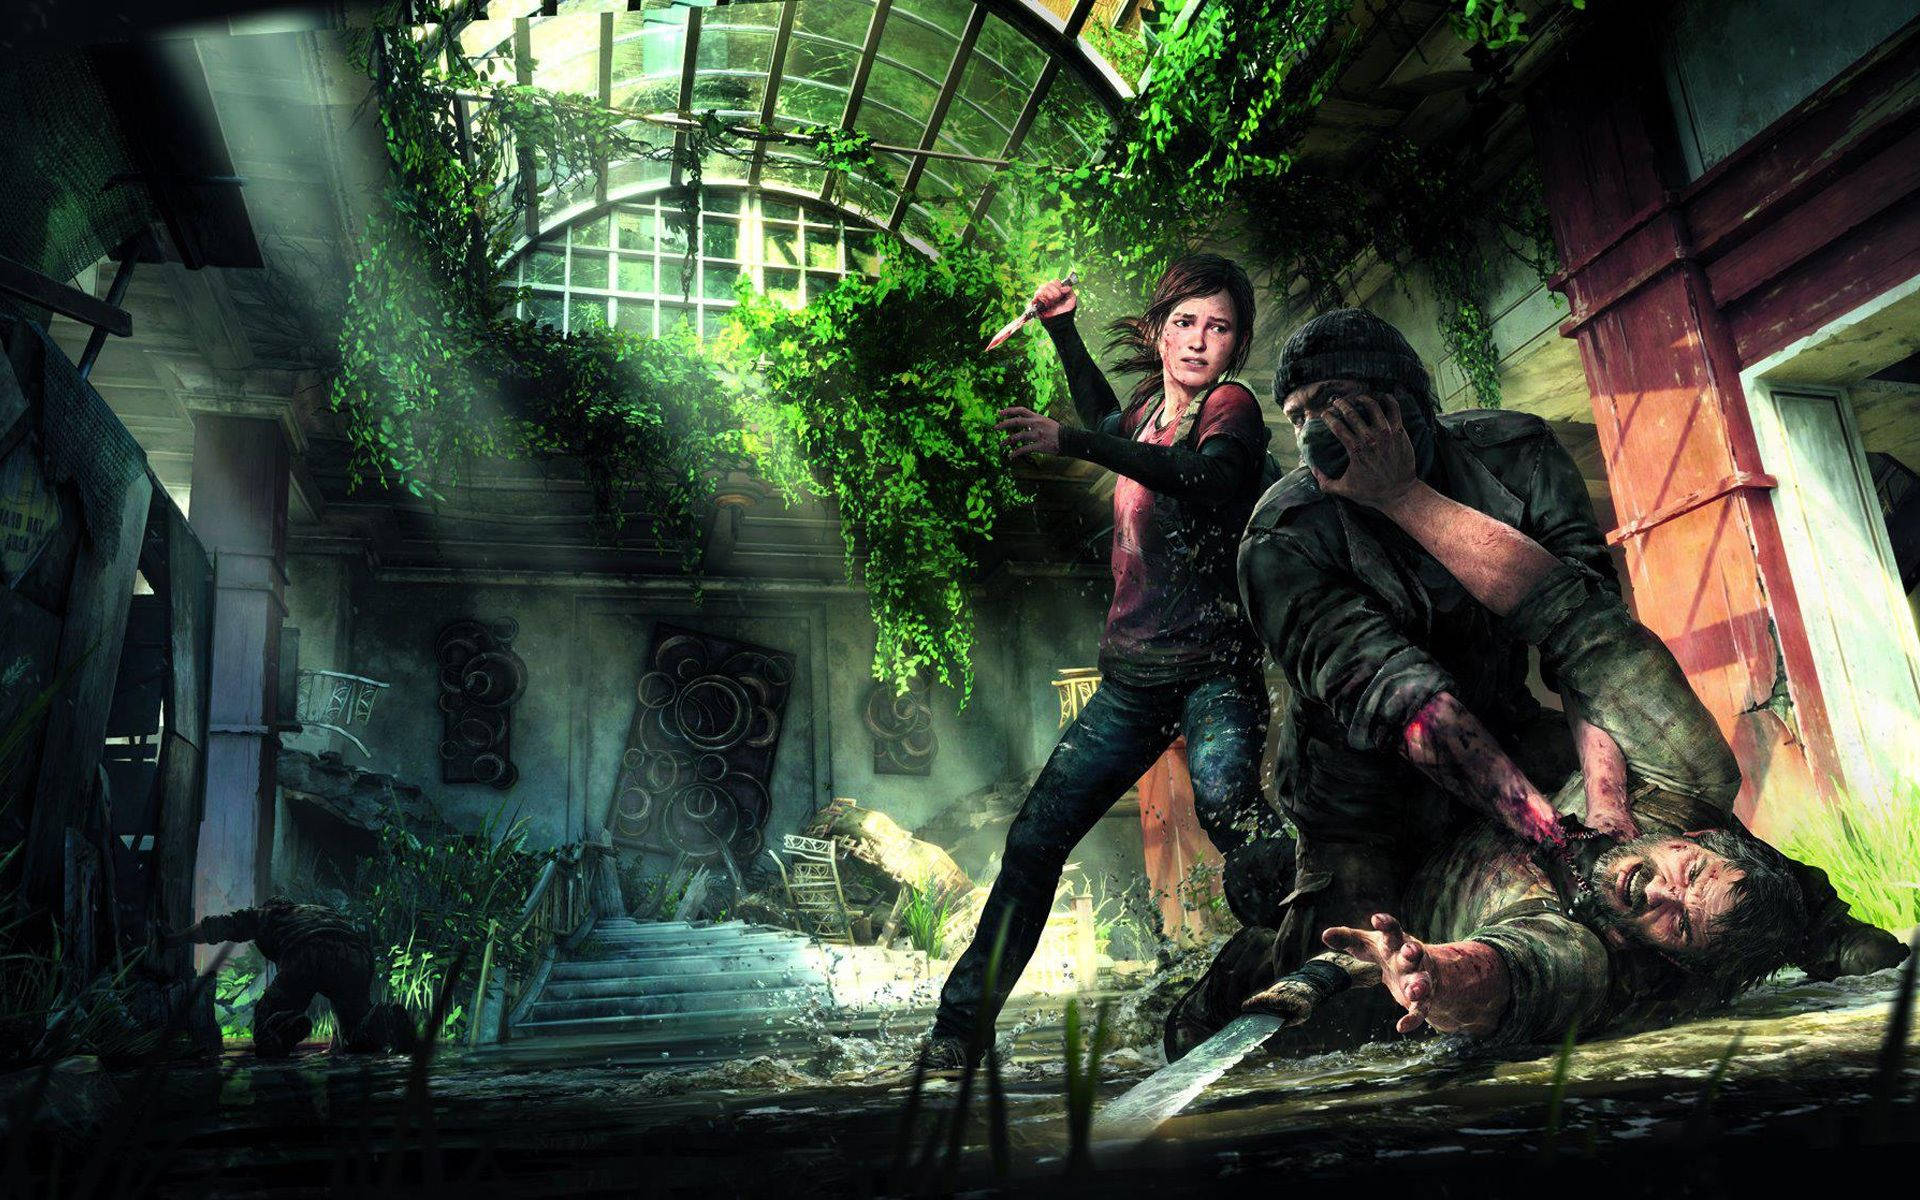 Joel And Ellie Team Up Against The Dangers Of The Last Of Us. Background